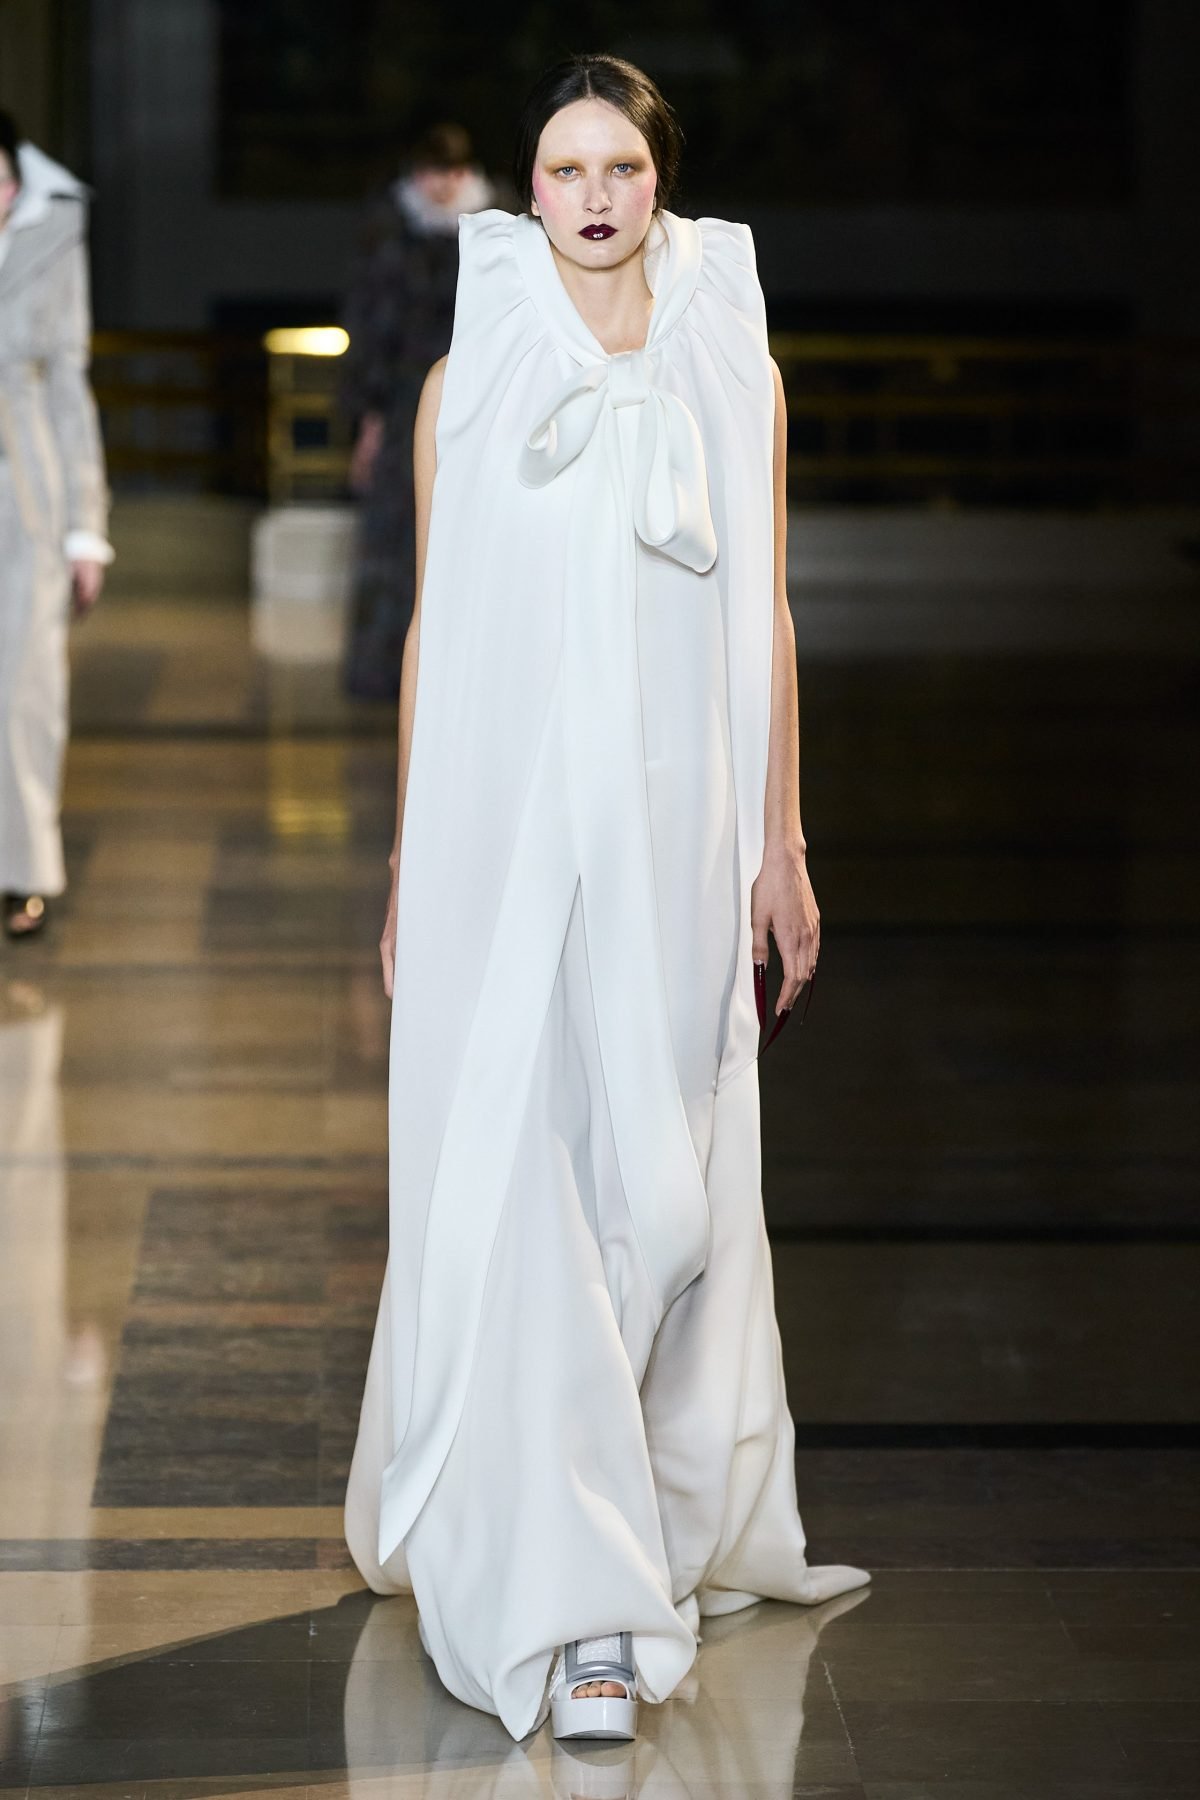 00002-Viktor-and-Rolf-Spring-22-Couture-credit-Alessandro-Lucioni-Gorunway-1200x1800 (1).jpeg